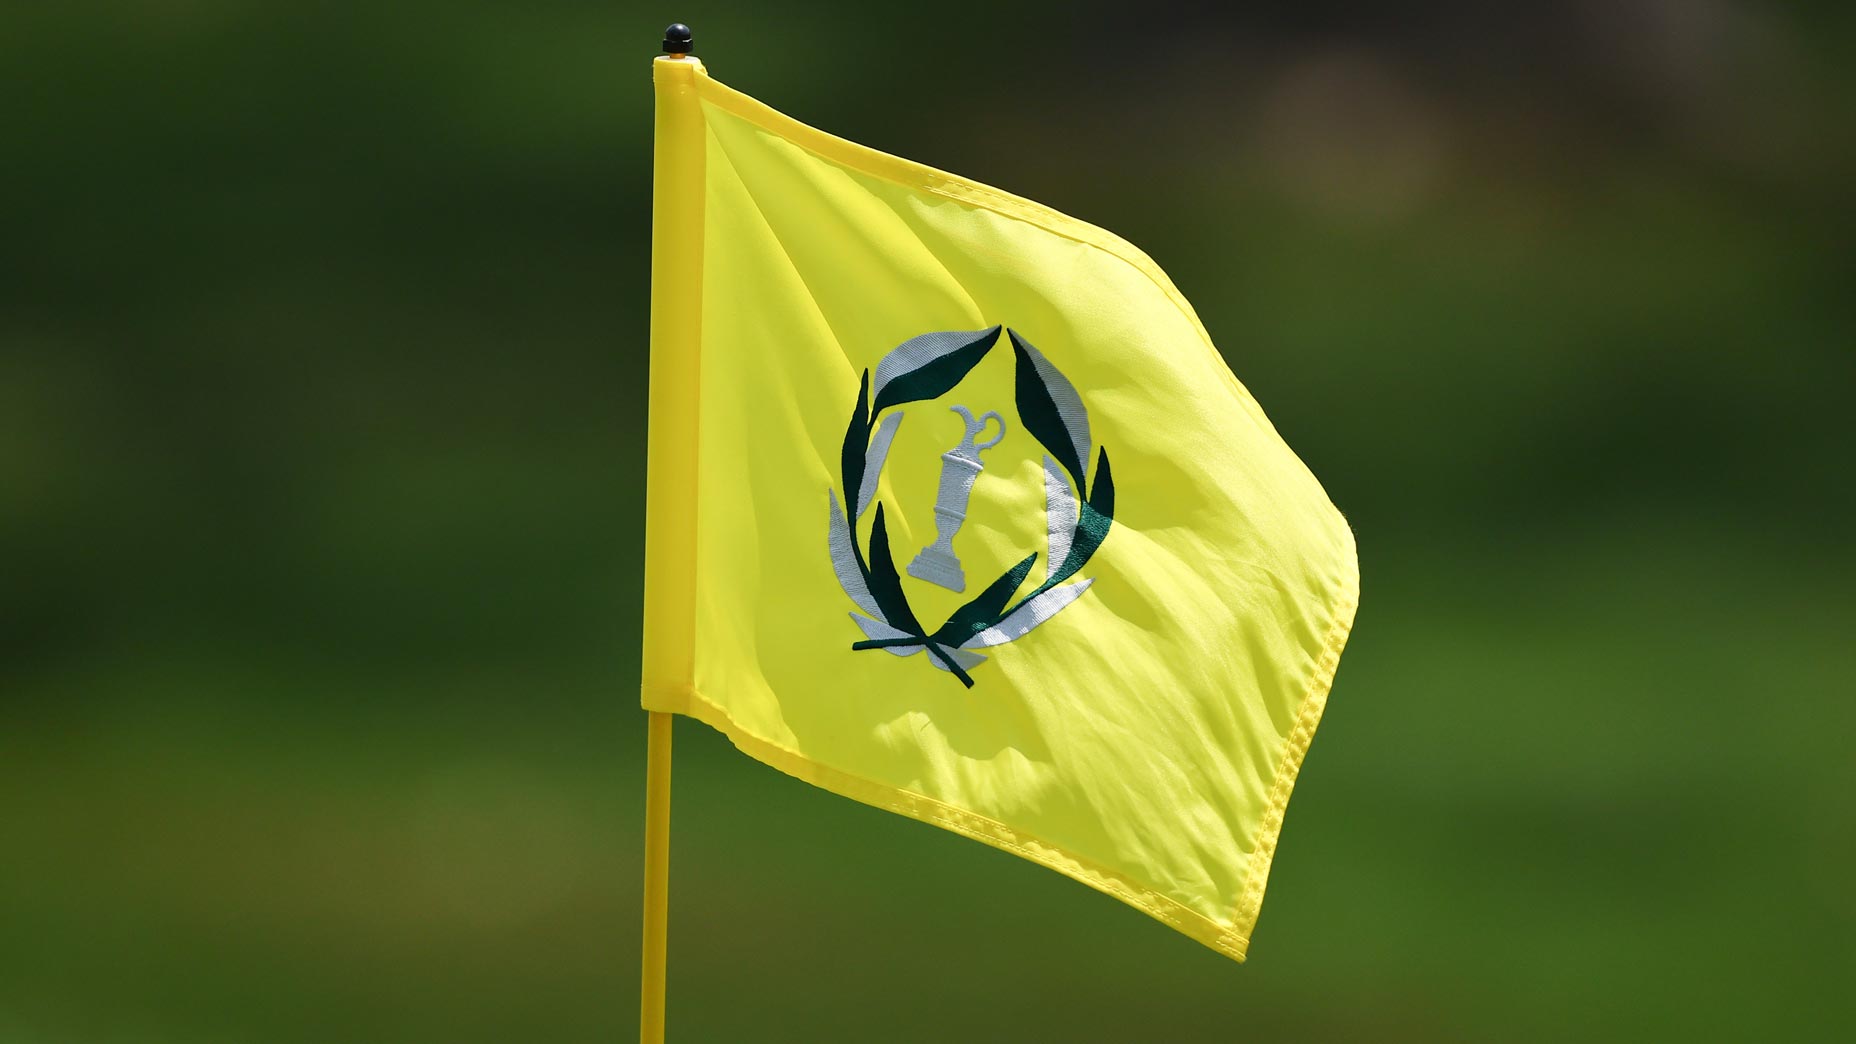 A yellow Memorial Tournament flag flies at Muirfield Village during the event